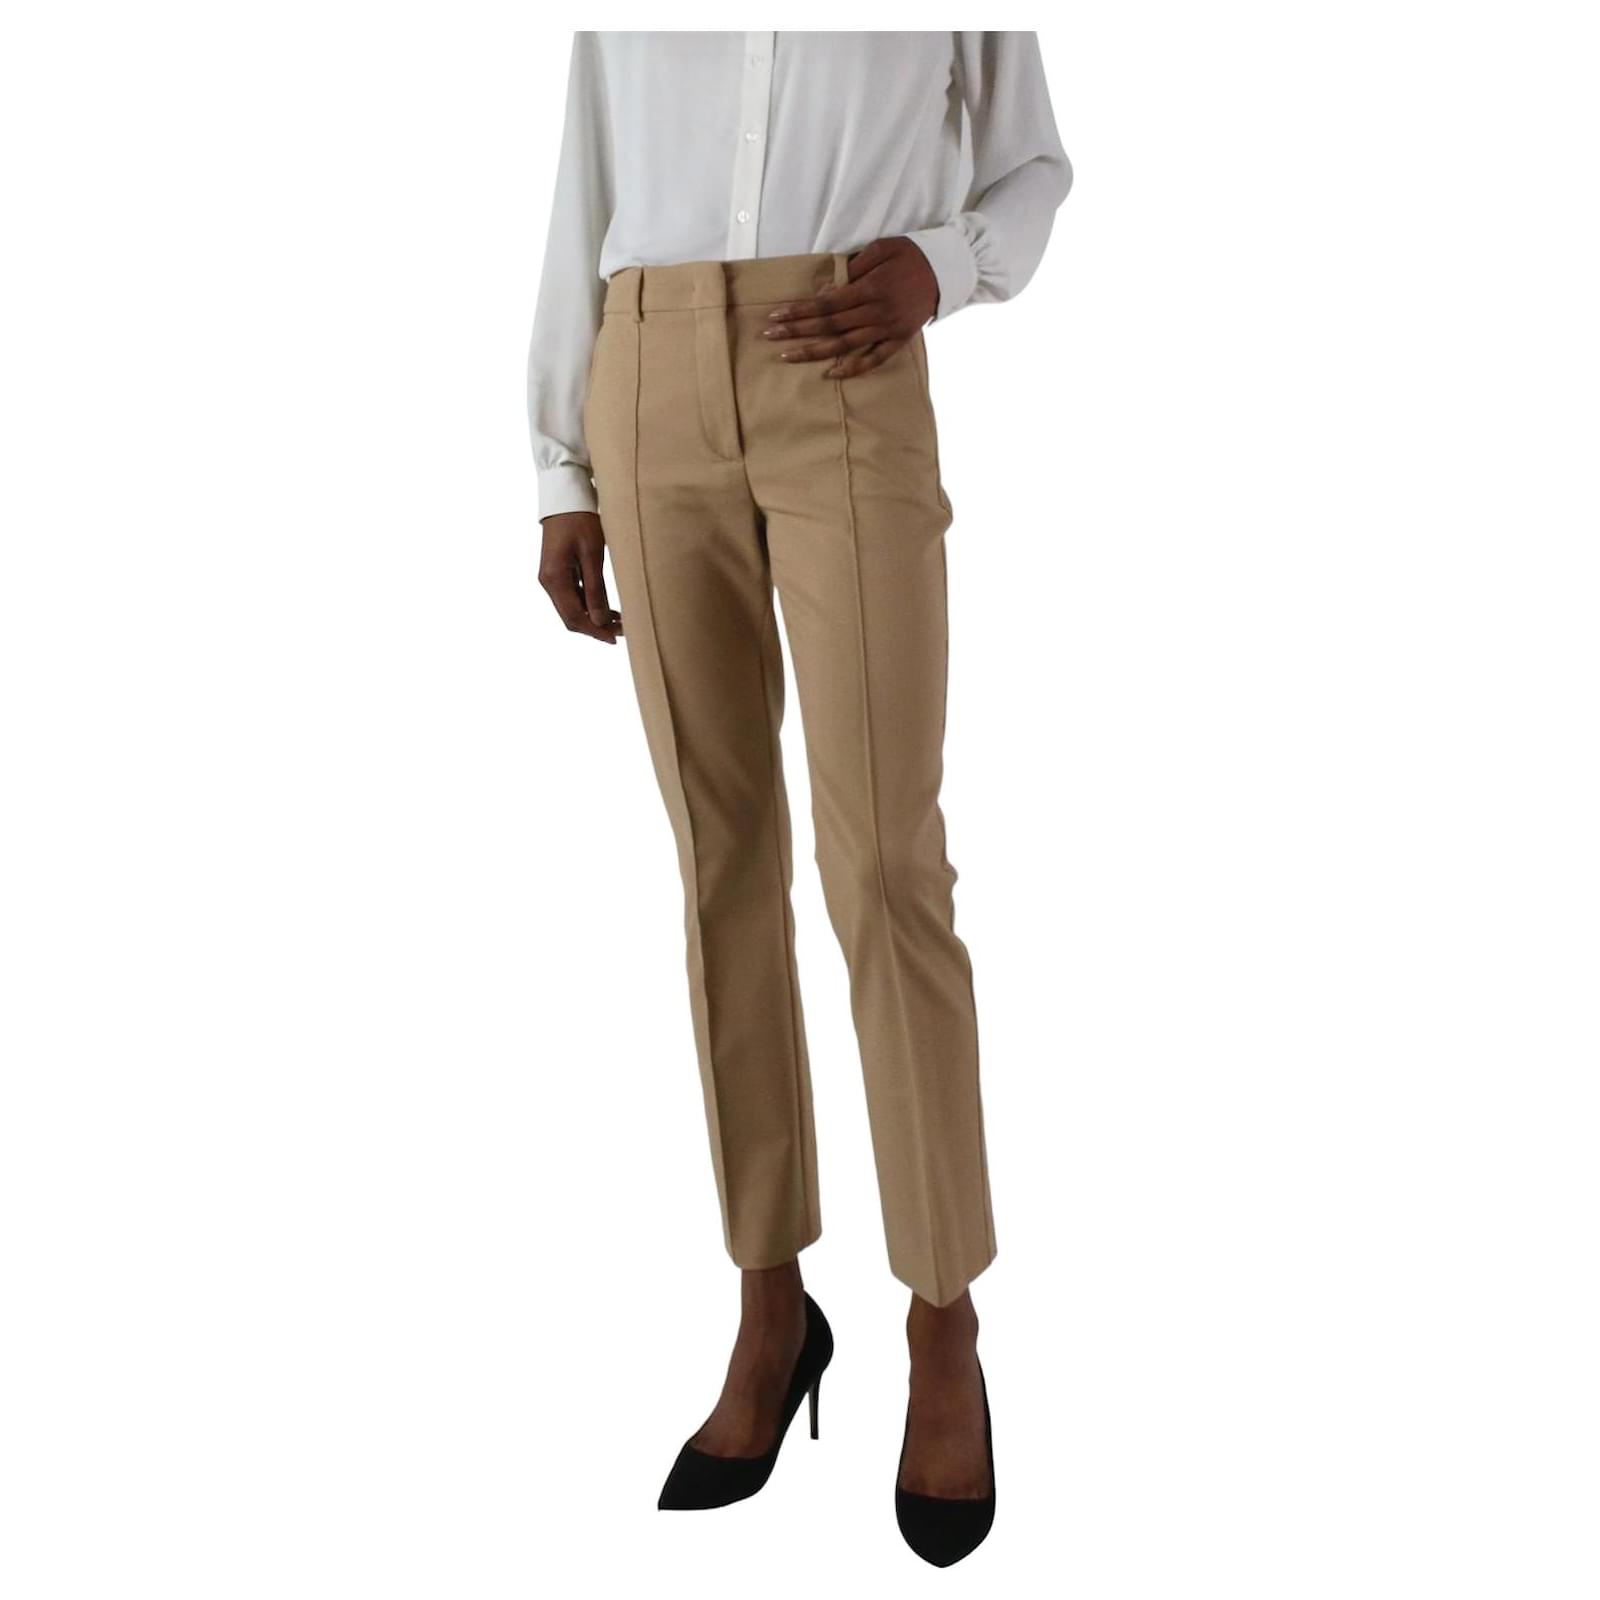 ASOS Petite Chino Trousers in Stone Size UK 6, Women's Fashion, Bottoms,  Other Bottoms on Carousell